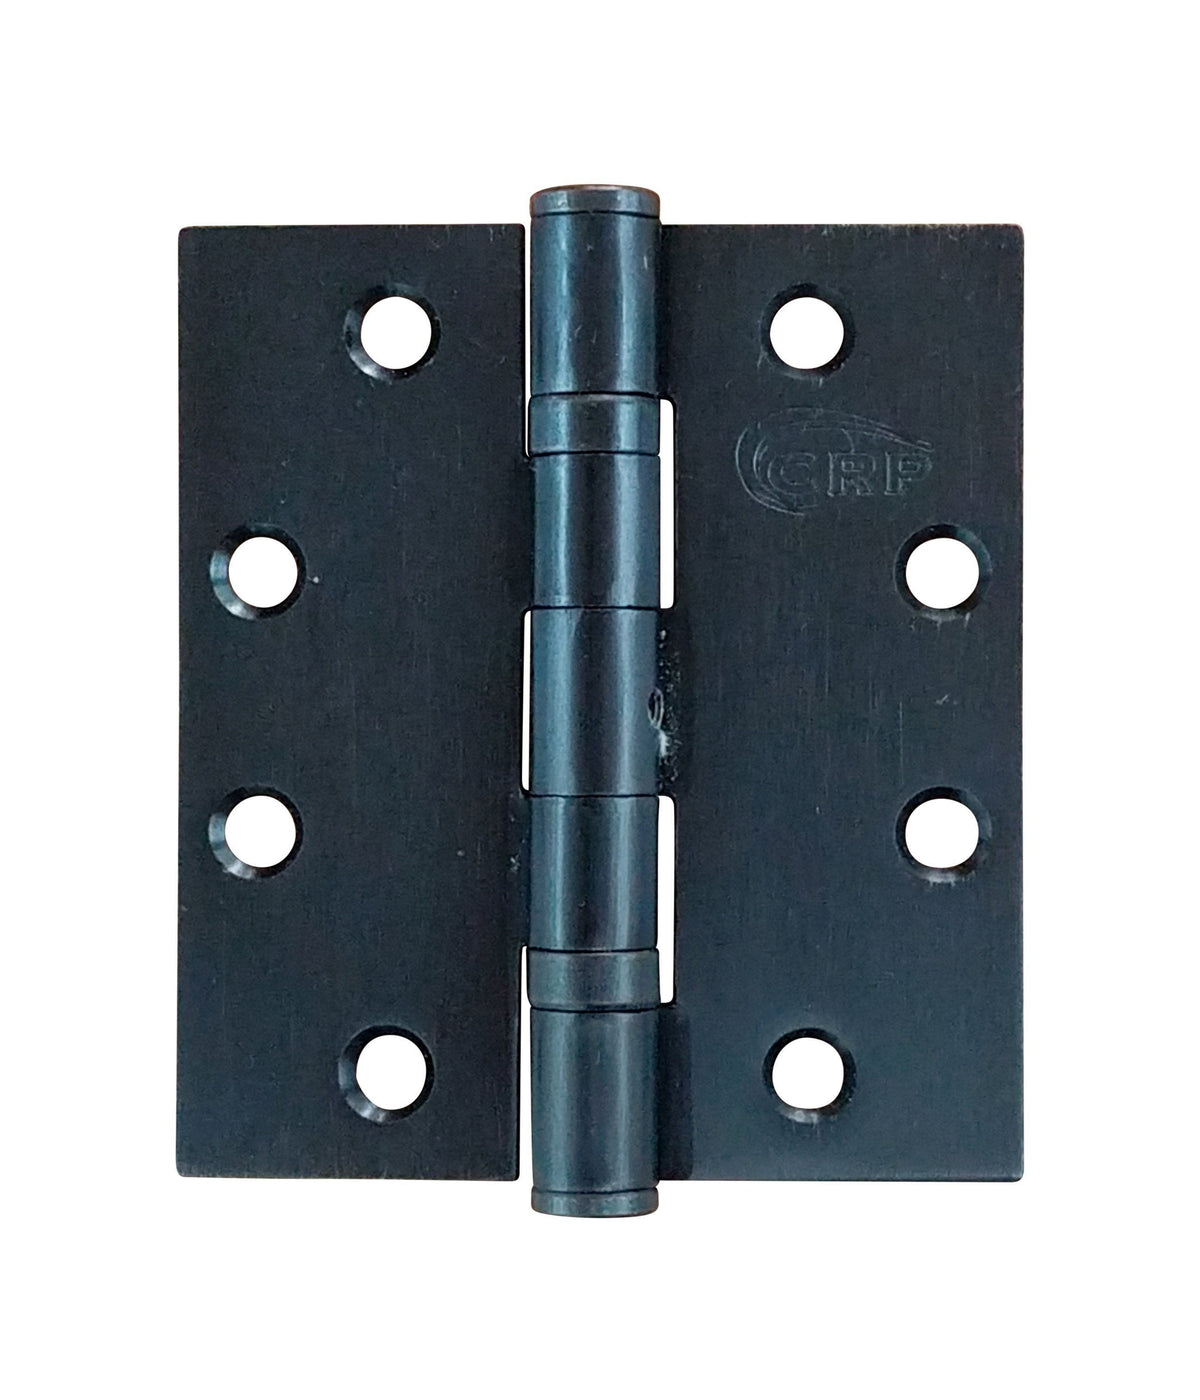 Commercial Ball Bearing Hinges - Heavy Duty Commercial Ball Bearing Door Hinges - 4.5" Inch X 4" Inch - Black - Non Removable Pin - 2 Pack